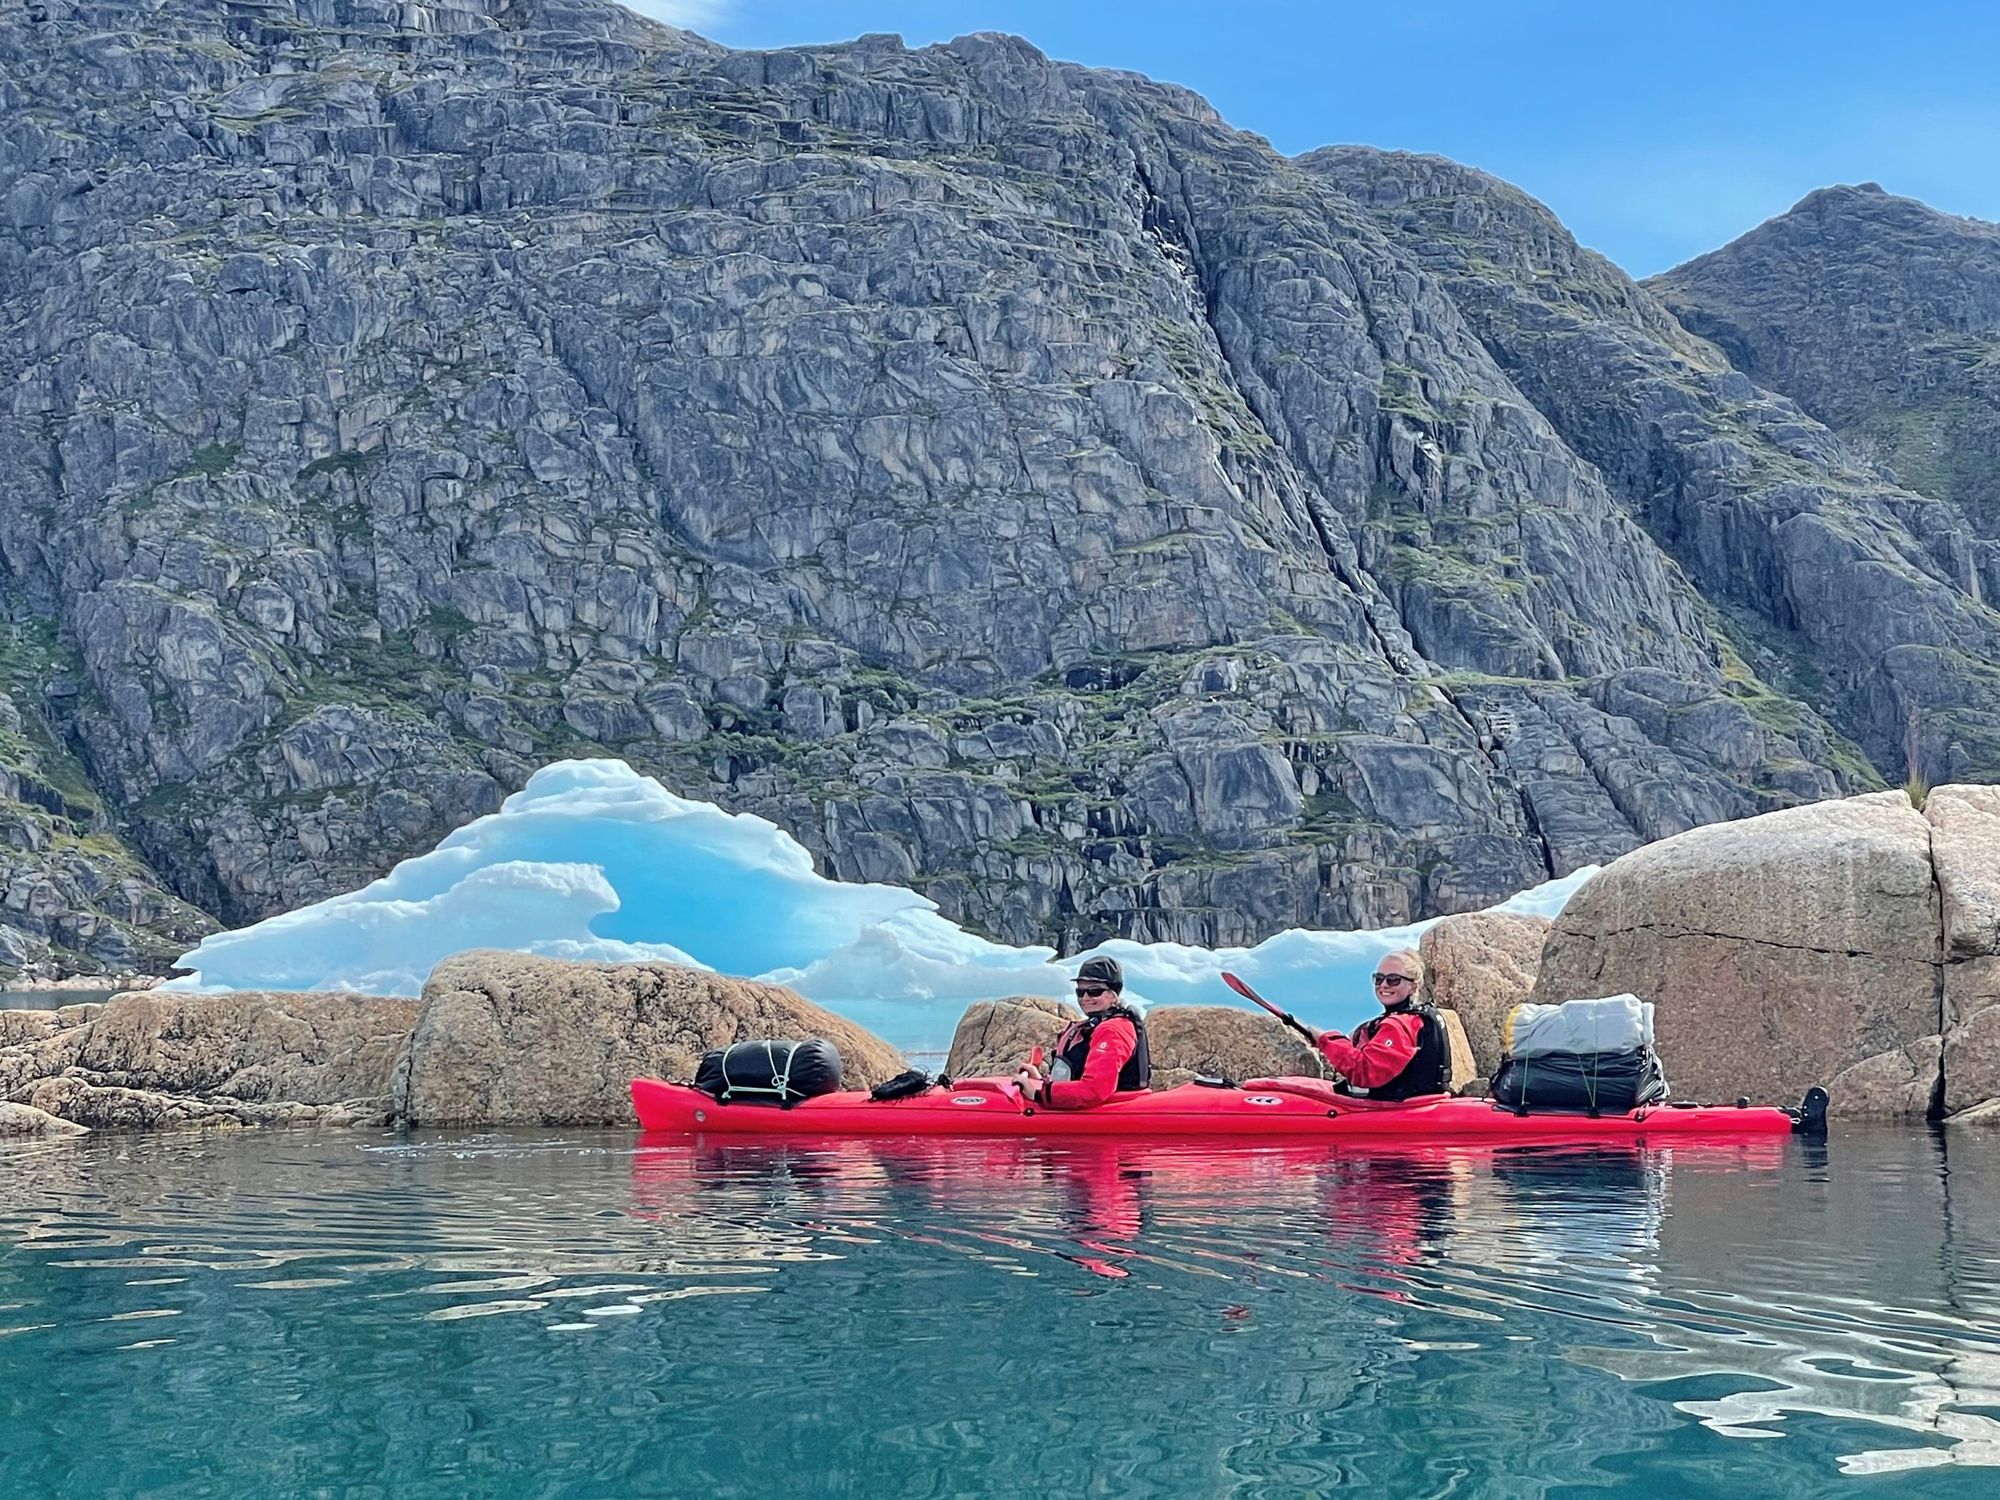 Kayaking in Greenland: A Group Photo Story